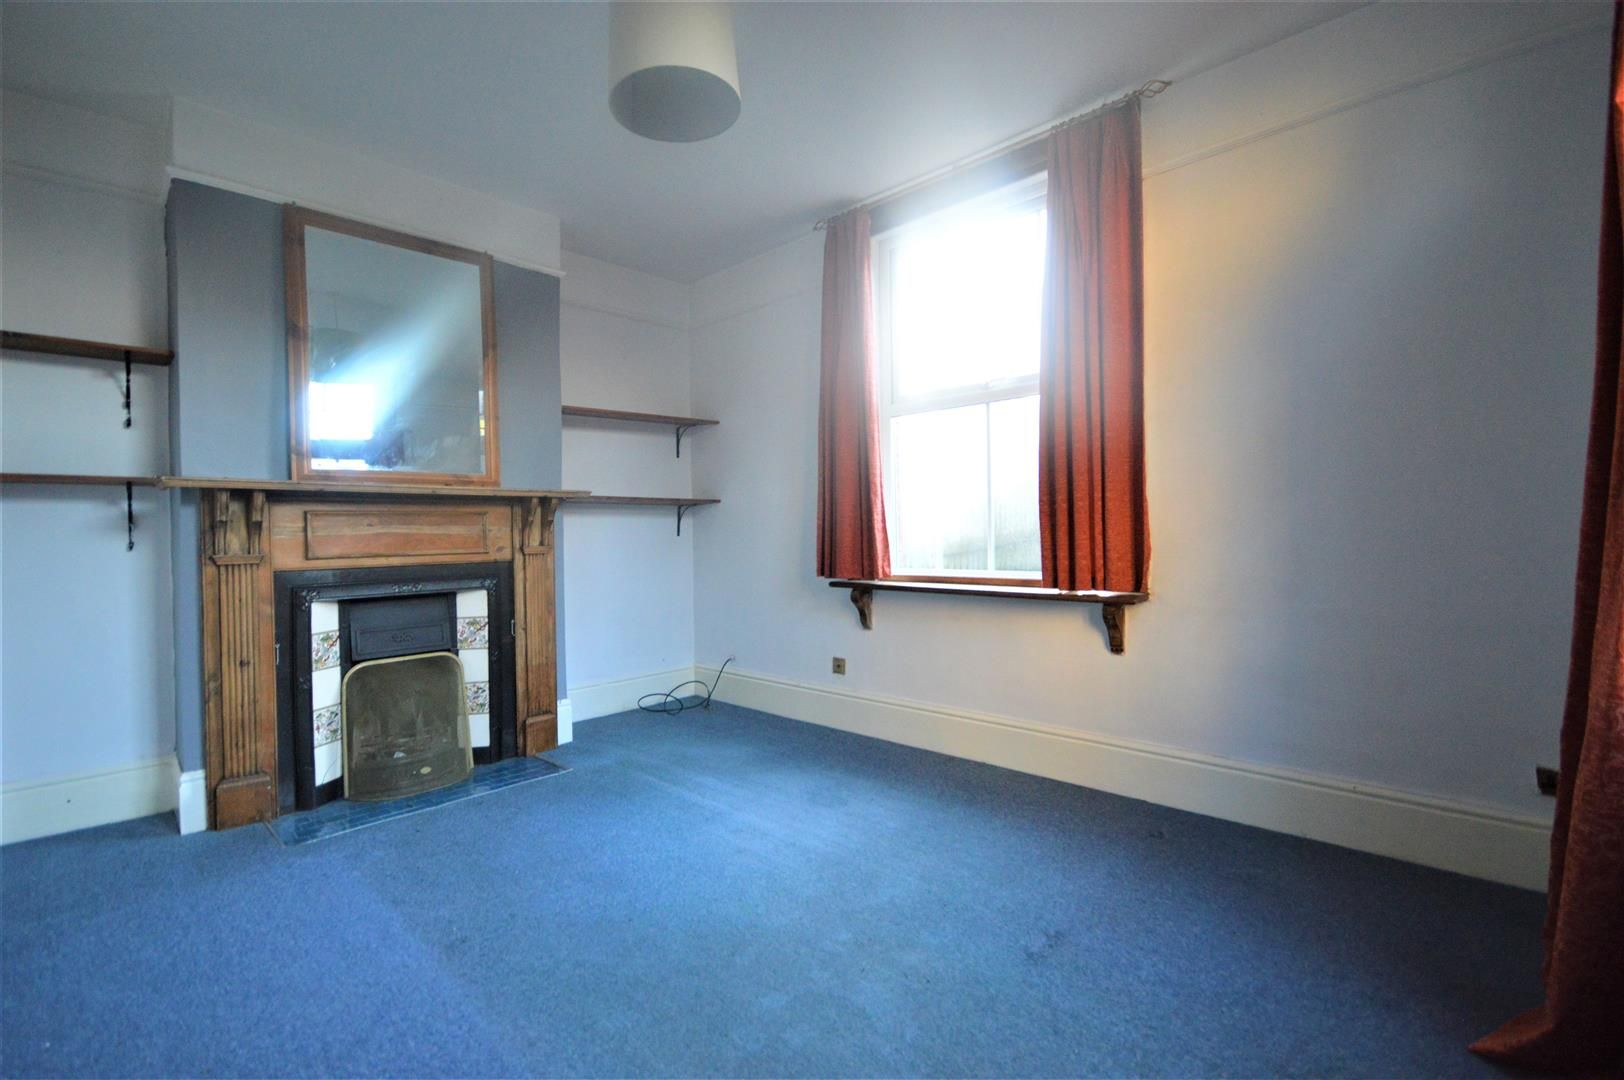 3 bed end of terrace for sale in Leominster  - Property Image 2